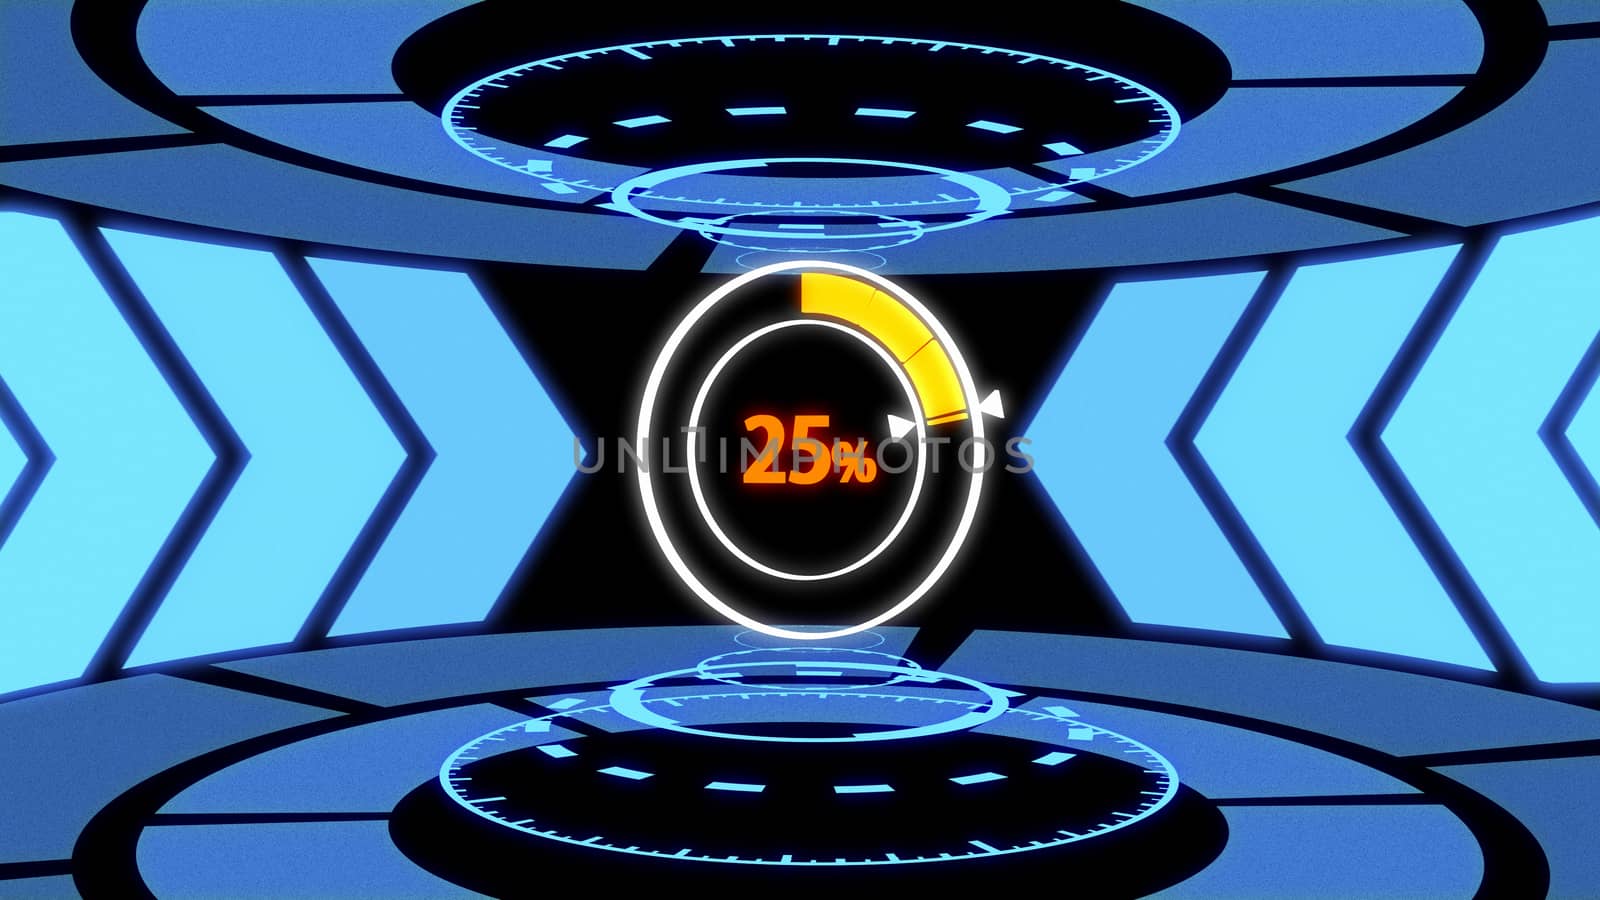 3D Loading screen HUD in Technology Laboratory with Arrow Path Lights, Loading Circle and Digital Circles (25% loading)